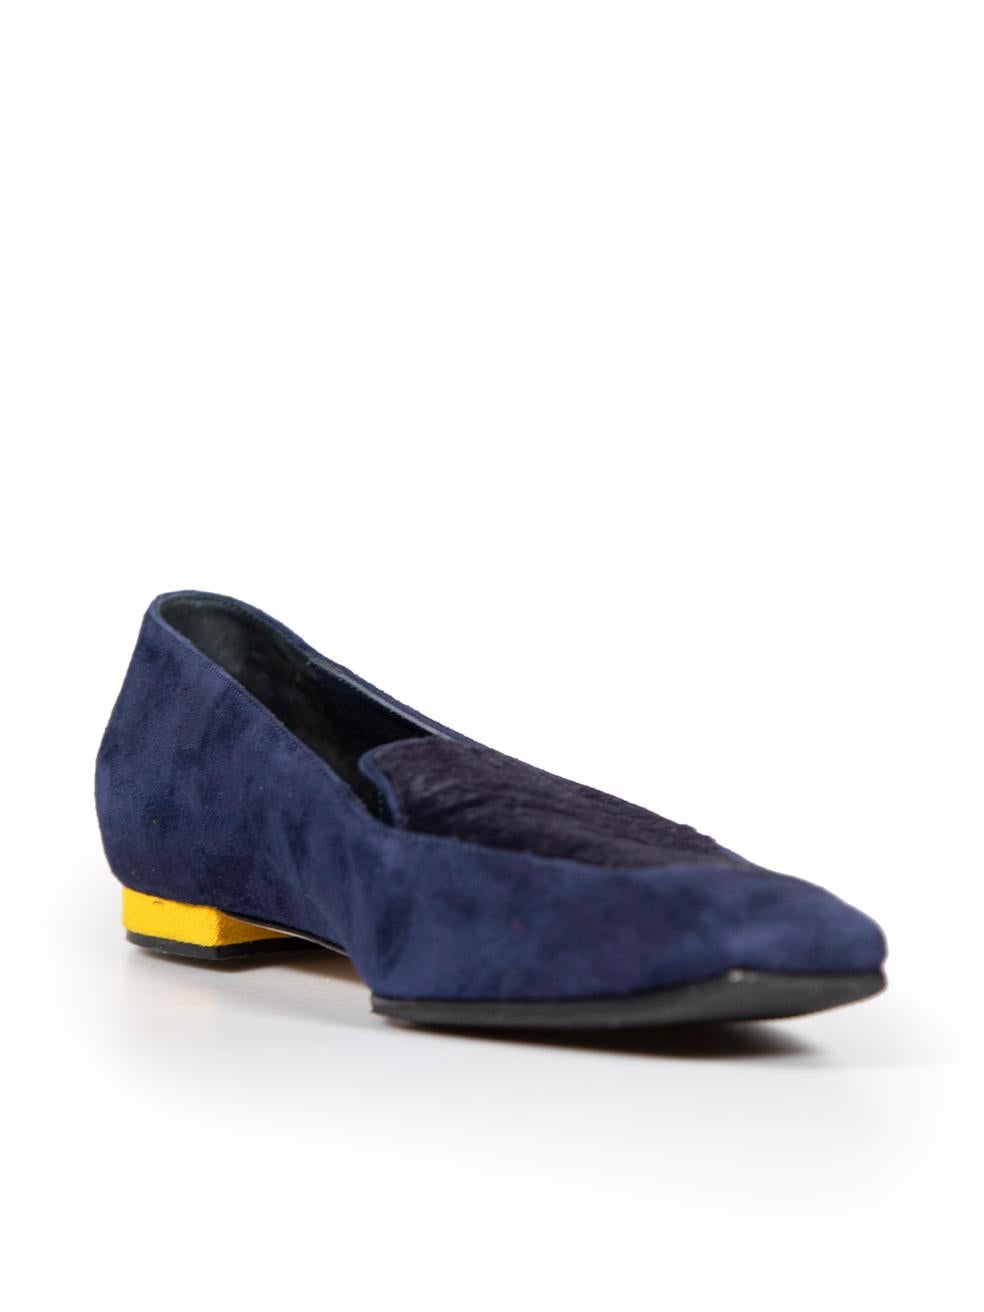 CONDITION is Very good. Minimal wear to loafers is evident. Minimal wear to the uppers with some light abrasion of the suede and pony-hair found at the toes as well as mild creasing over the forepart. The outsoles have been partially re-soled on